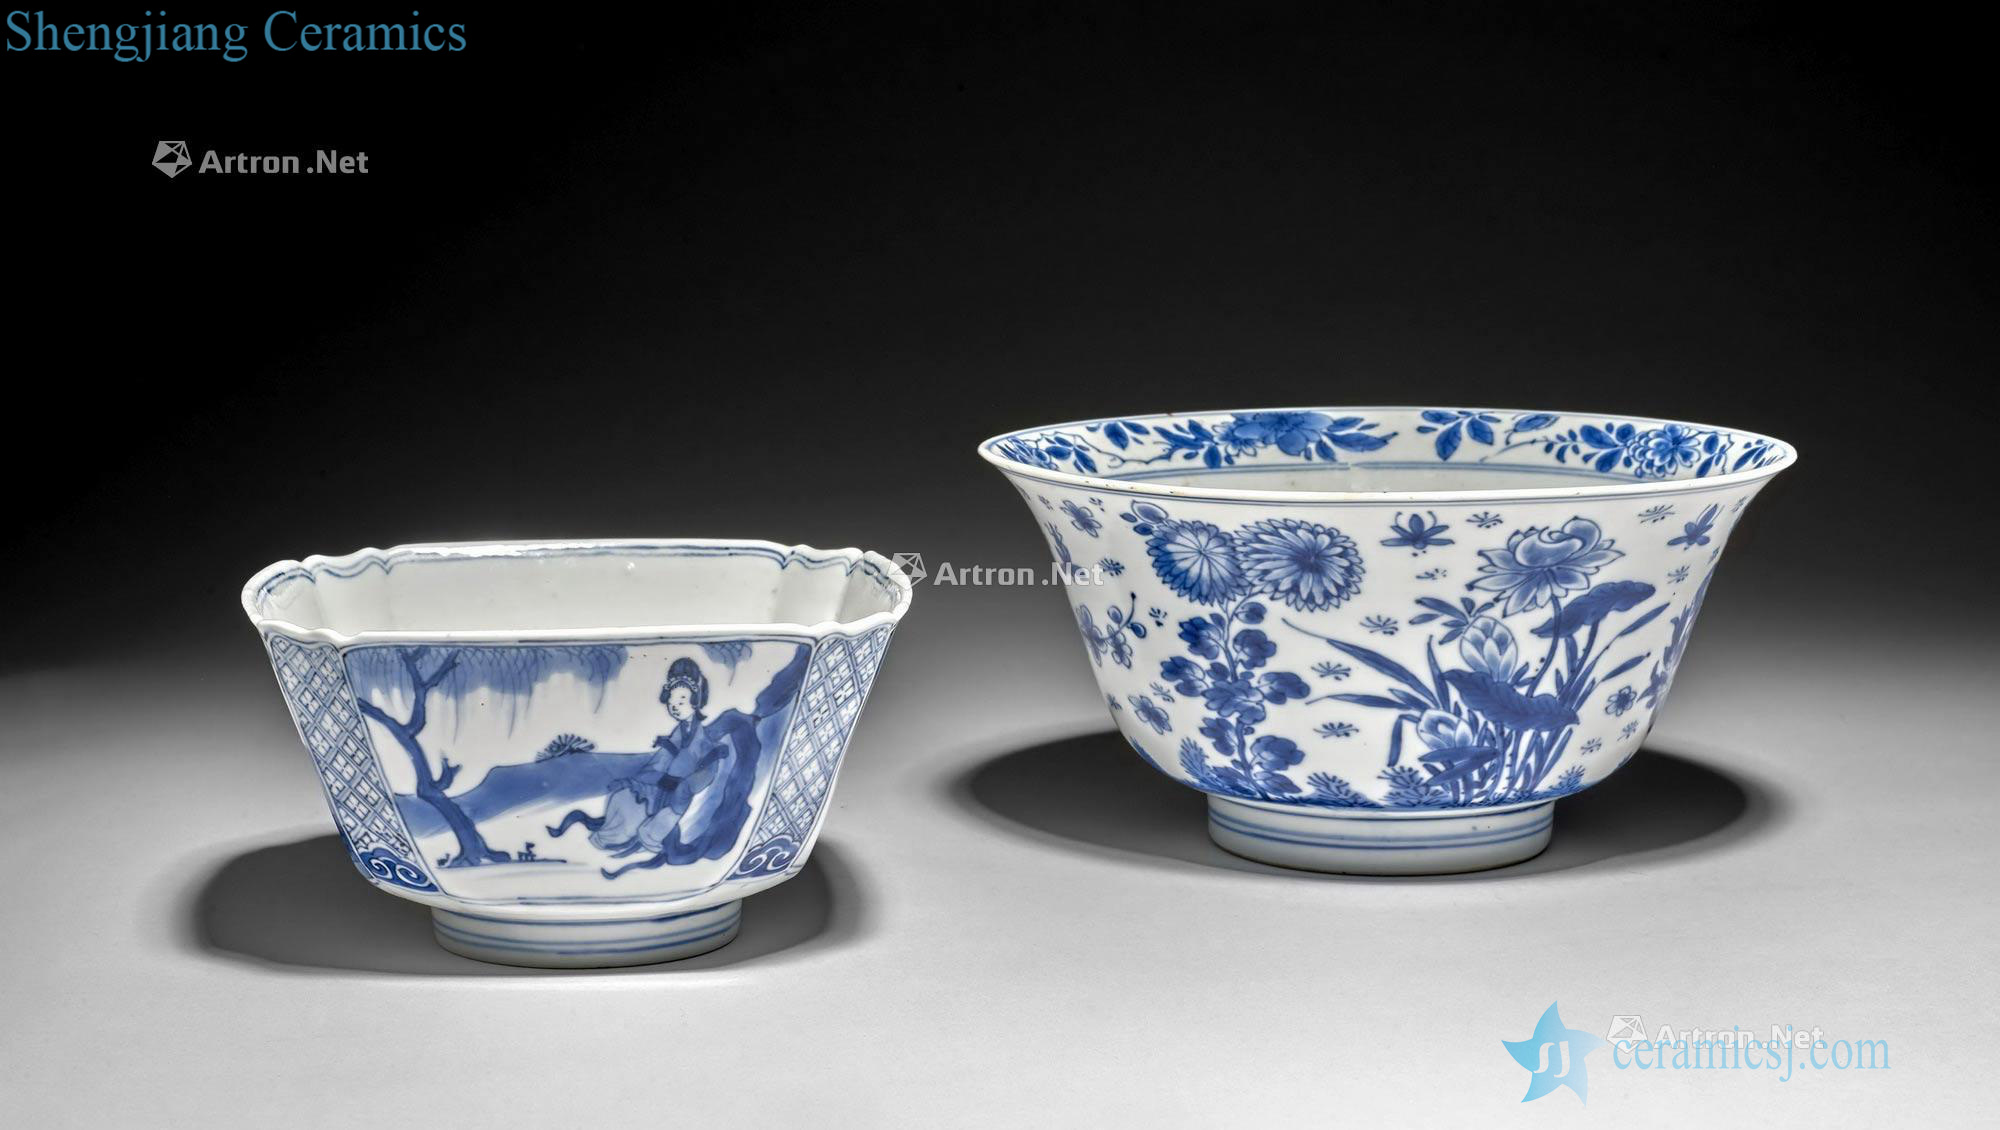 China, the Qing dynasty, Kangxi period (1662-1722), Two blue and white porcelain bowls